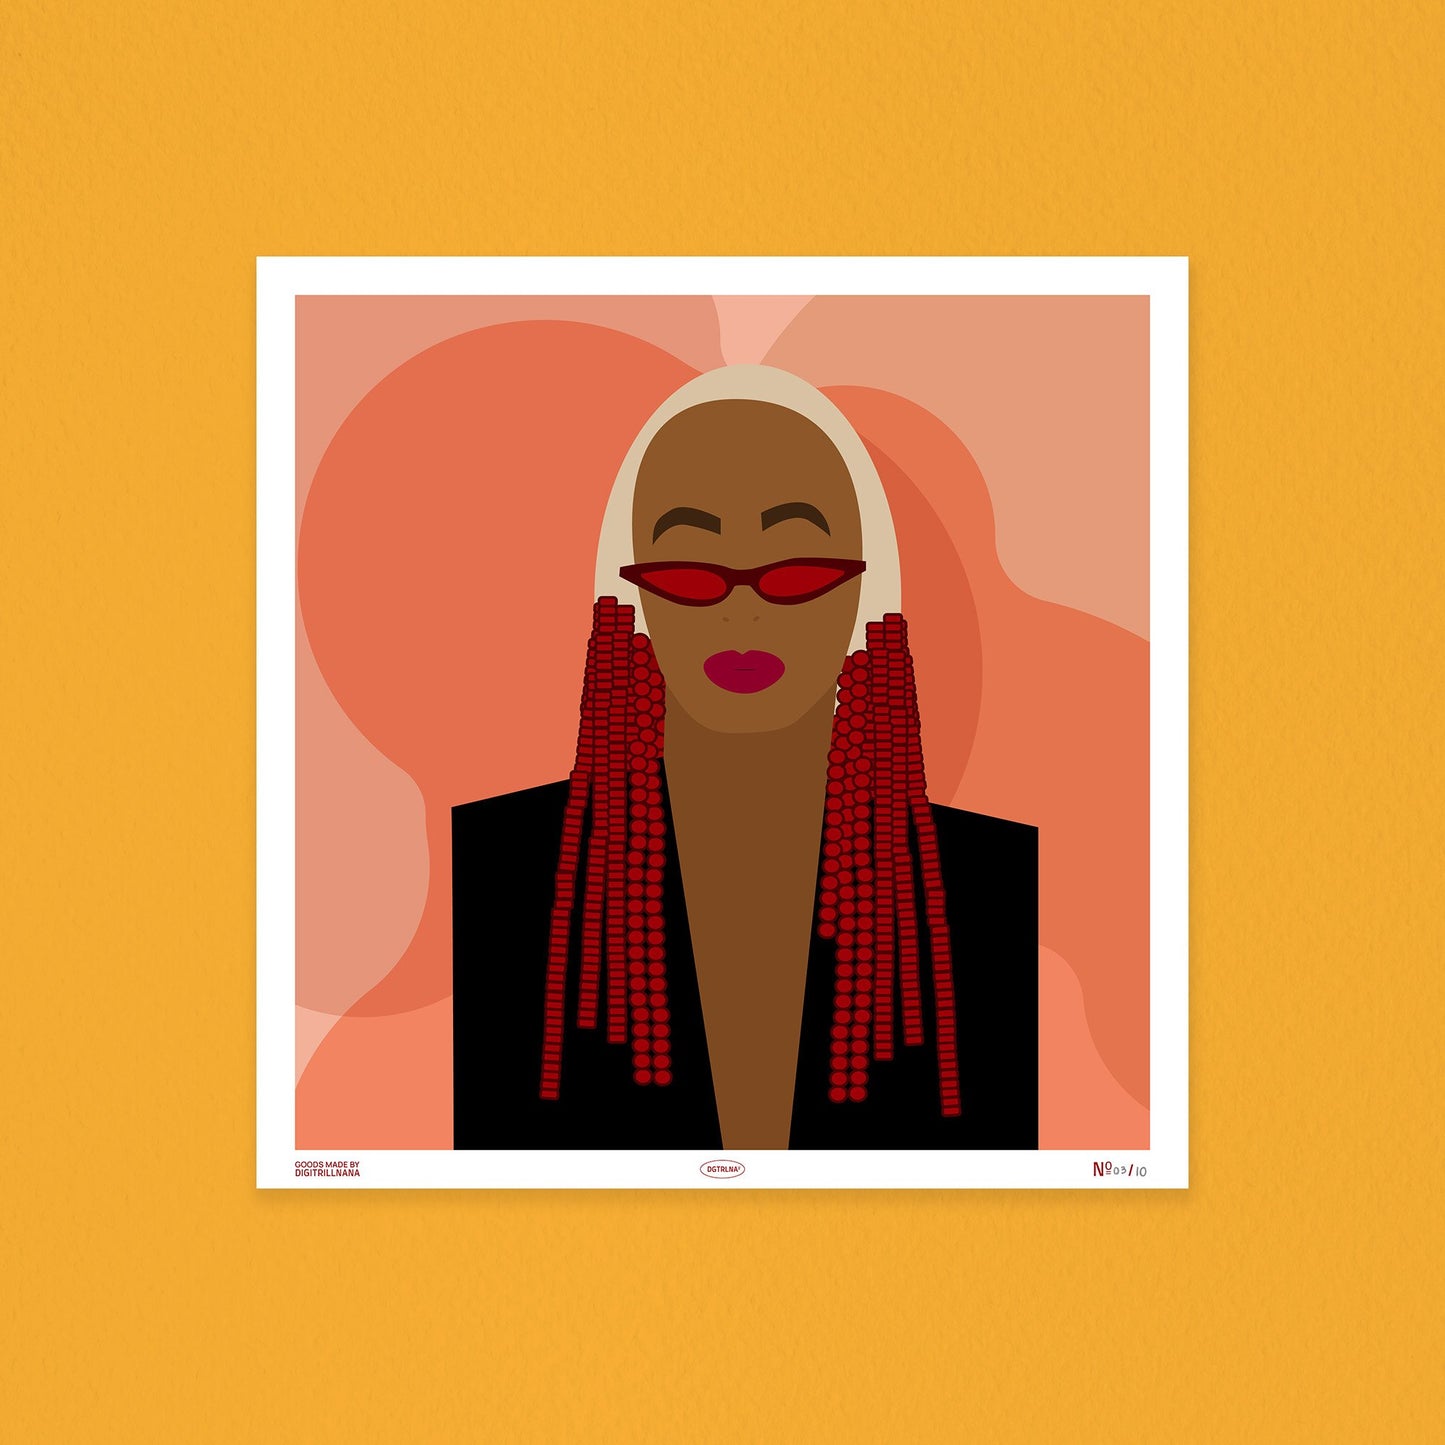 Homage to Solange 12x12” vector art print from Goods Made By Digitrillnana, Ashley Fletcher. Solange Knowles, Fahsion, Black Woman Art. Perfect for home decor, wall art, art prints, and more! Black Woman Owned.